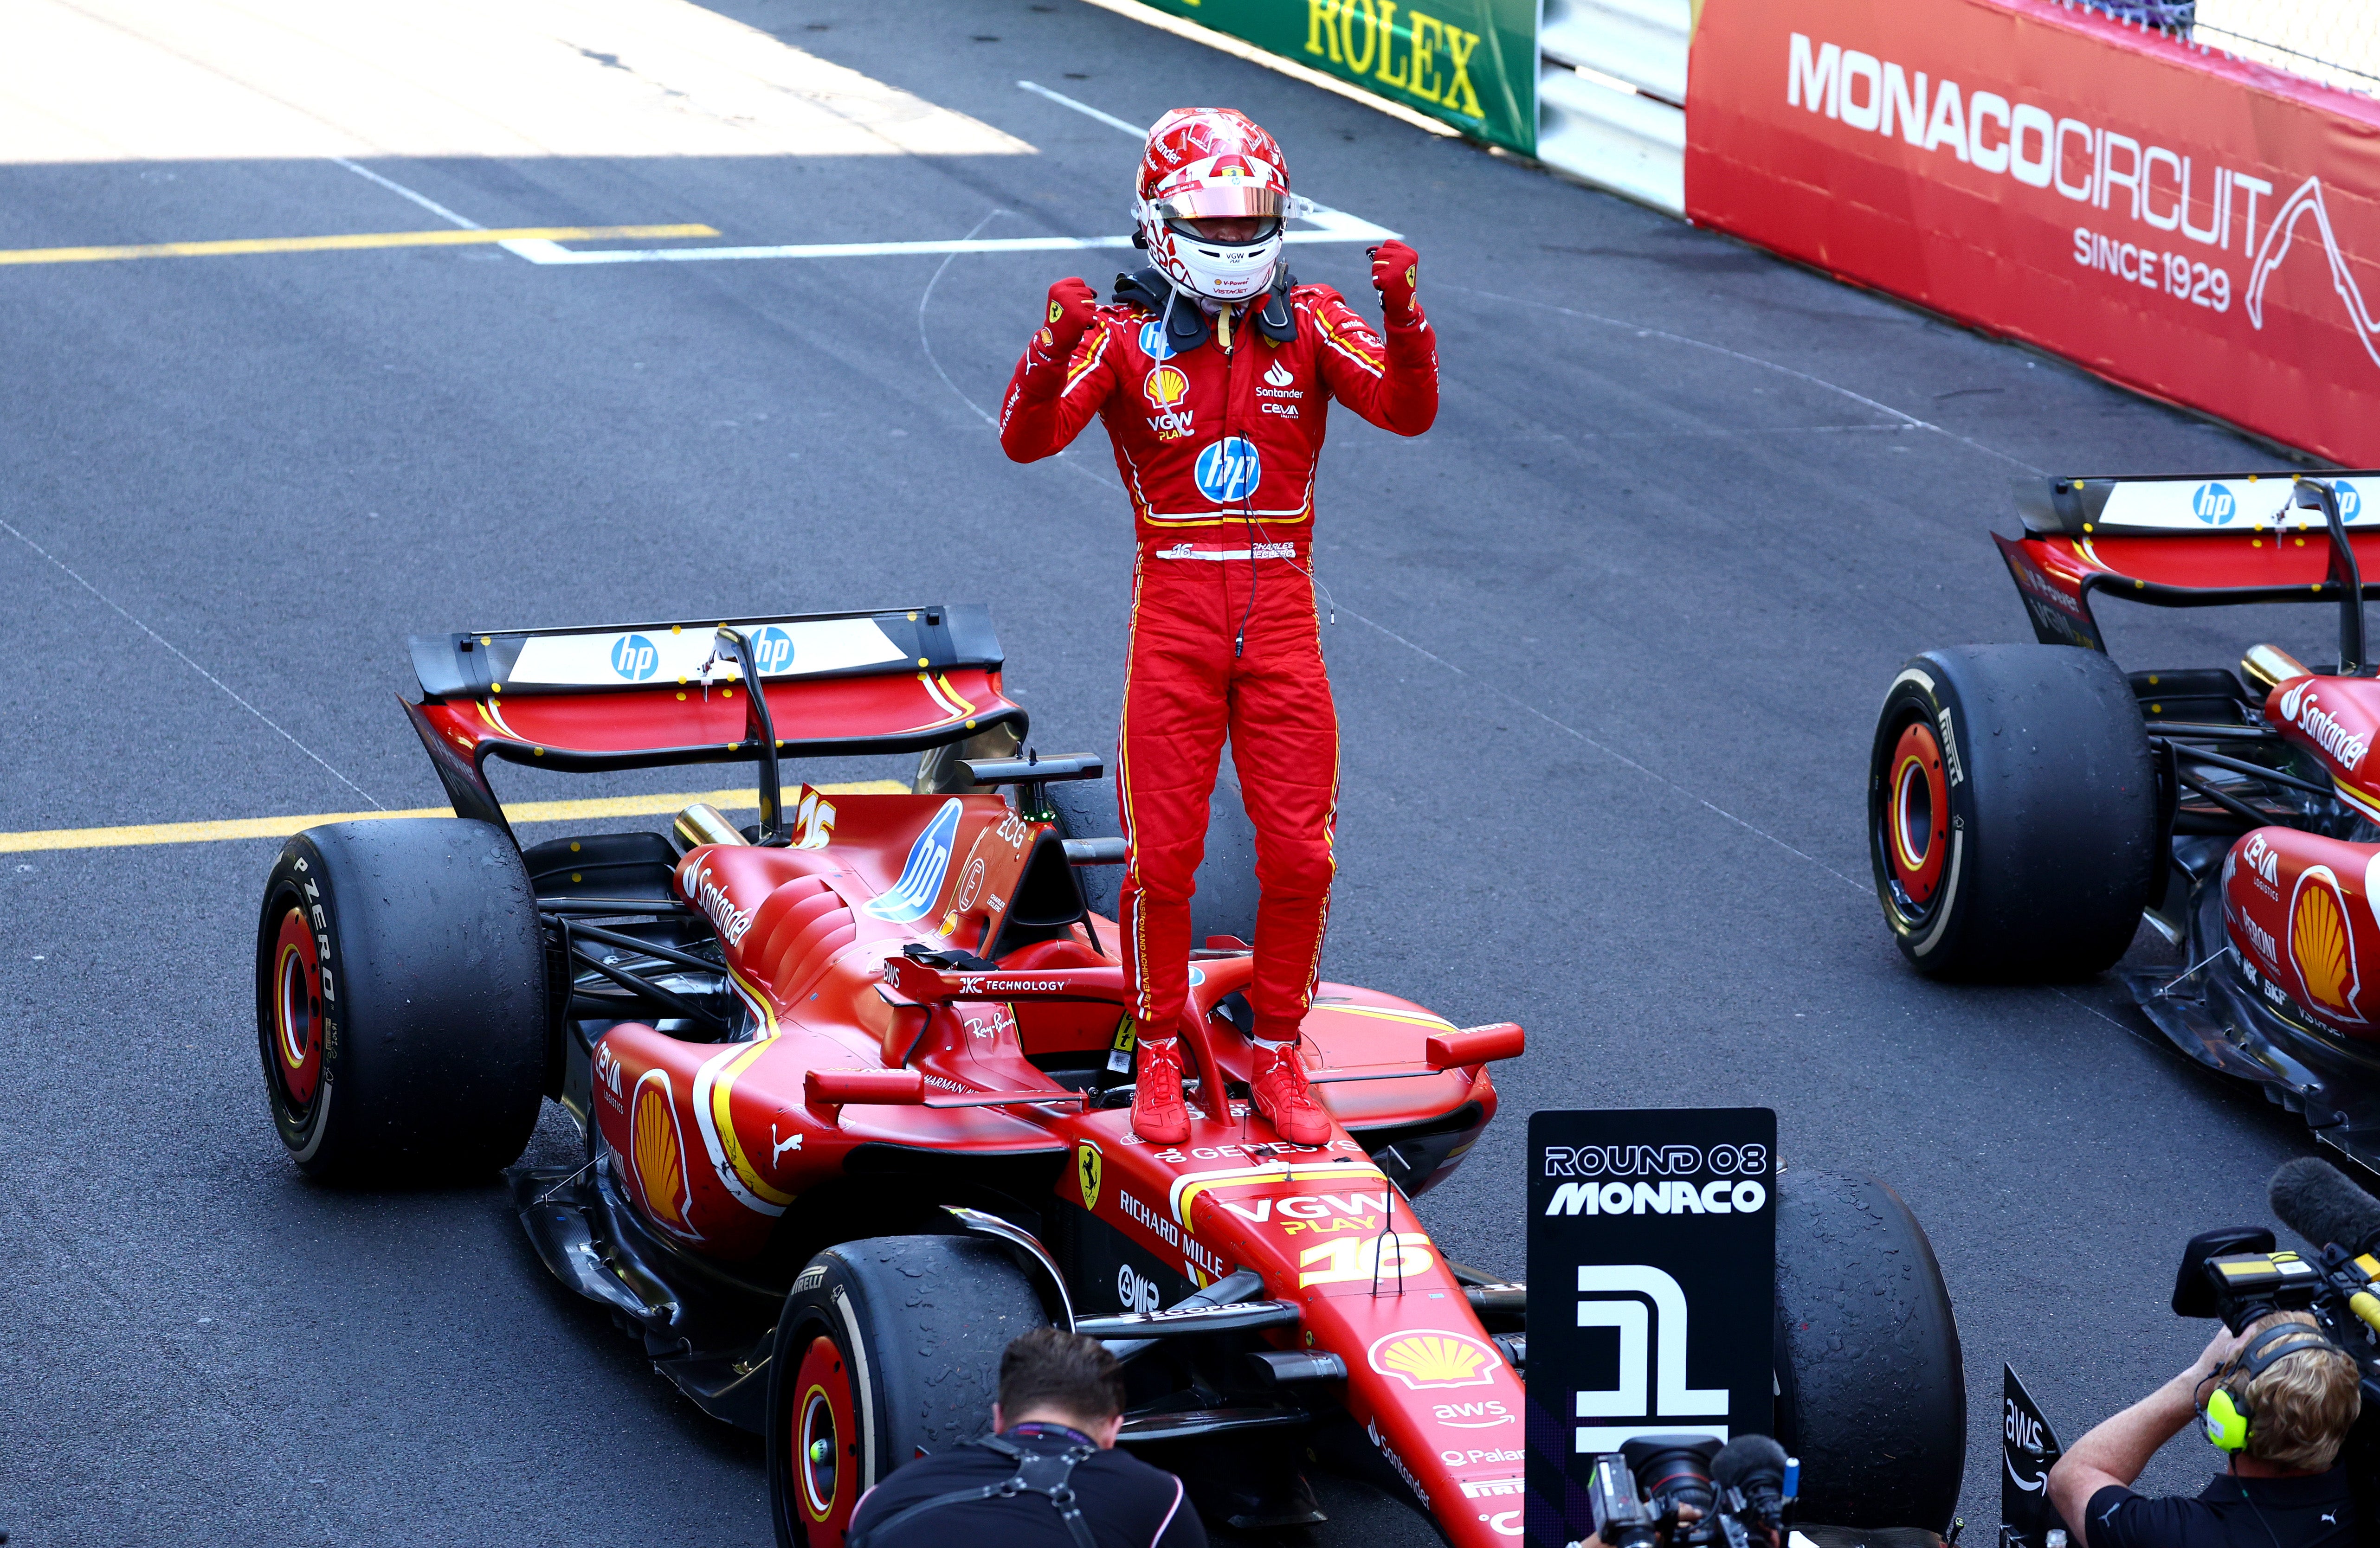 Charles Leclerc celebrates winning his home race in Monaco